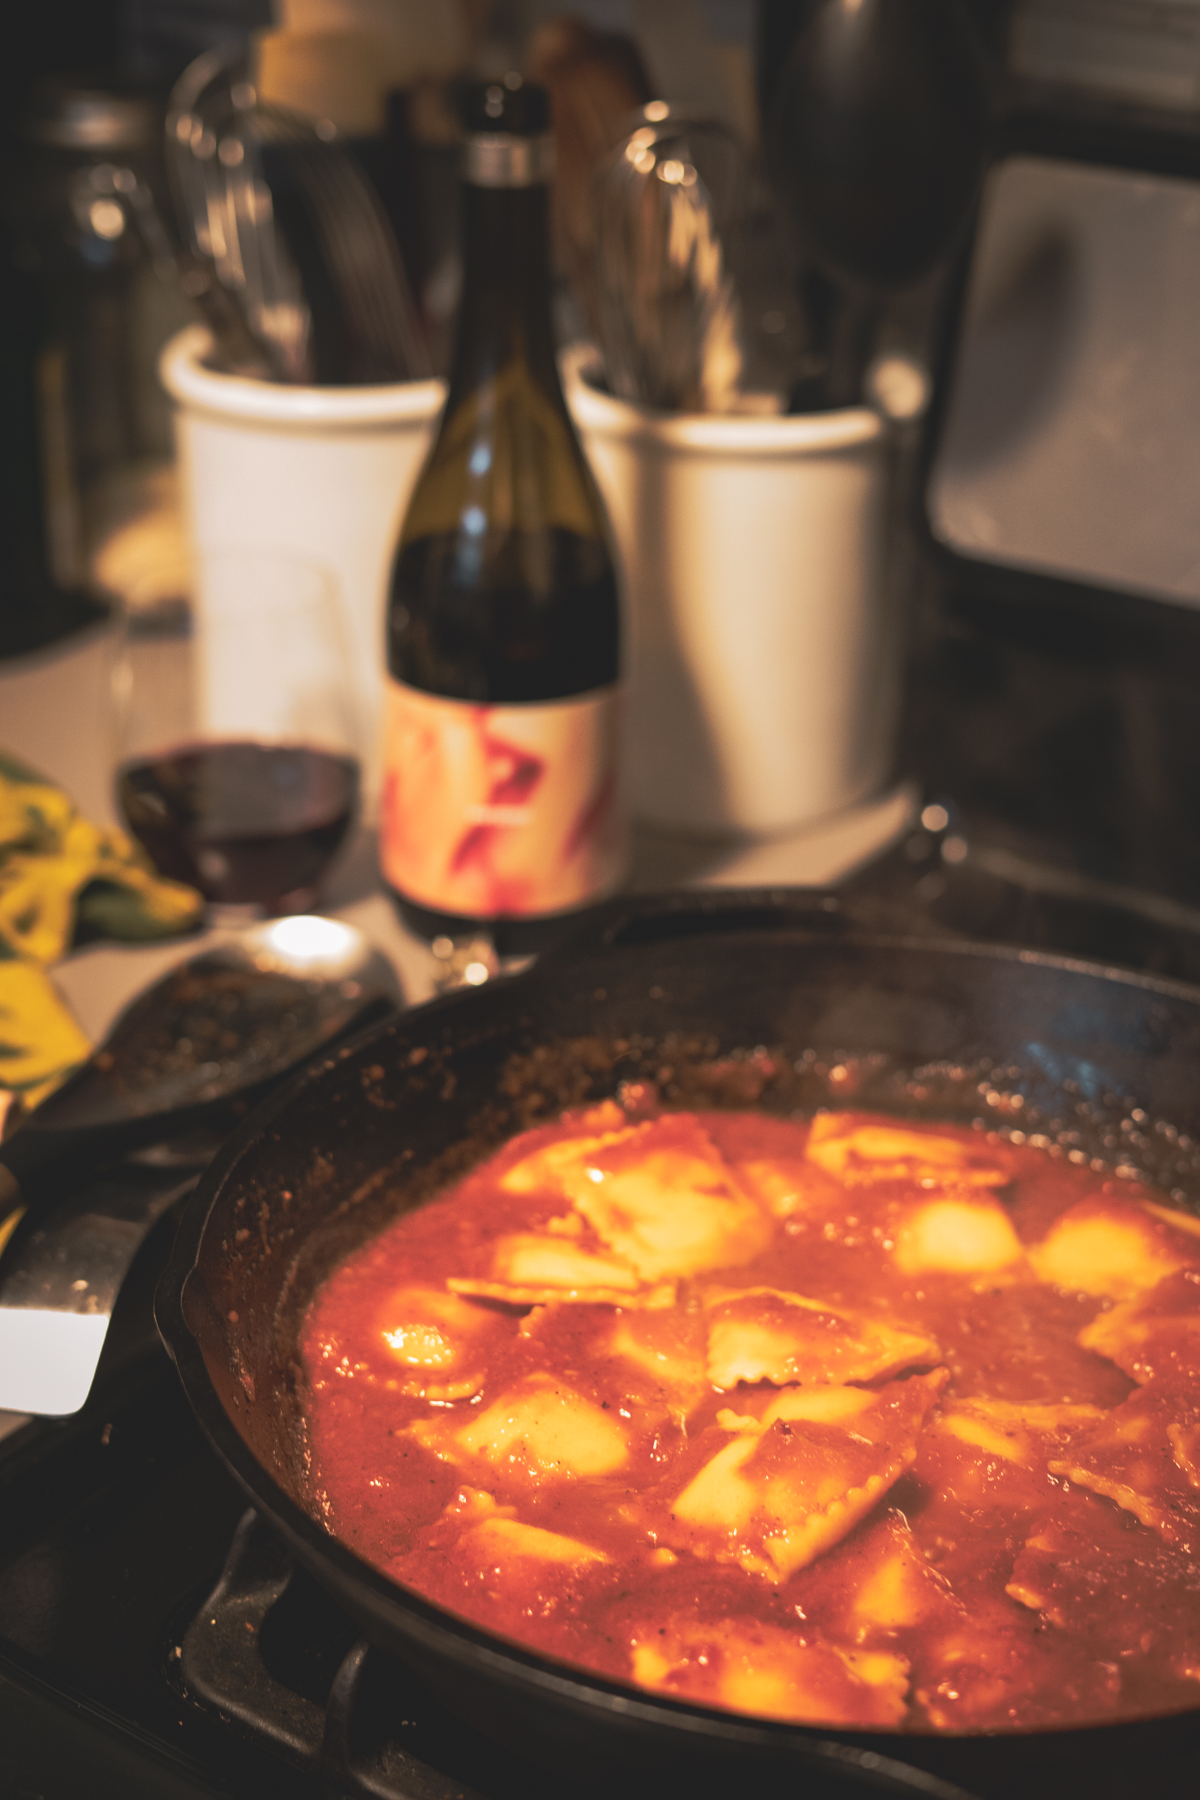 Ravioli with arrbiata sauce cooking on a stovetop in a cast iron pan. A bottle of Softcore wine is sitting on the counter top with a glass of wine next to it. There are two ceramic utensil bins behind the wine and the corner of a kitchen towel can be seen on the counter.